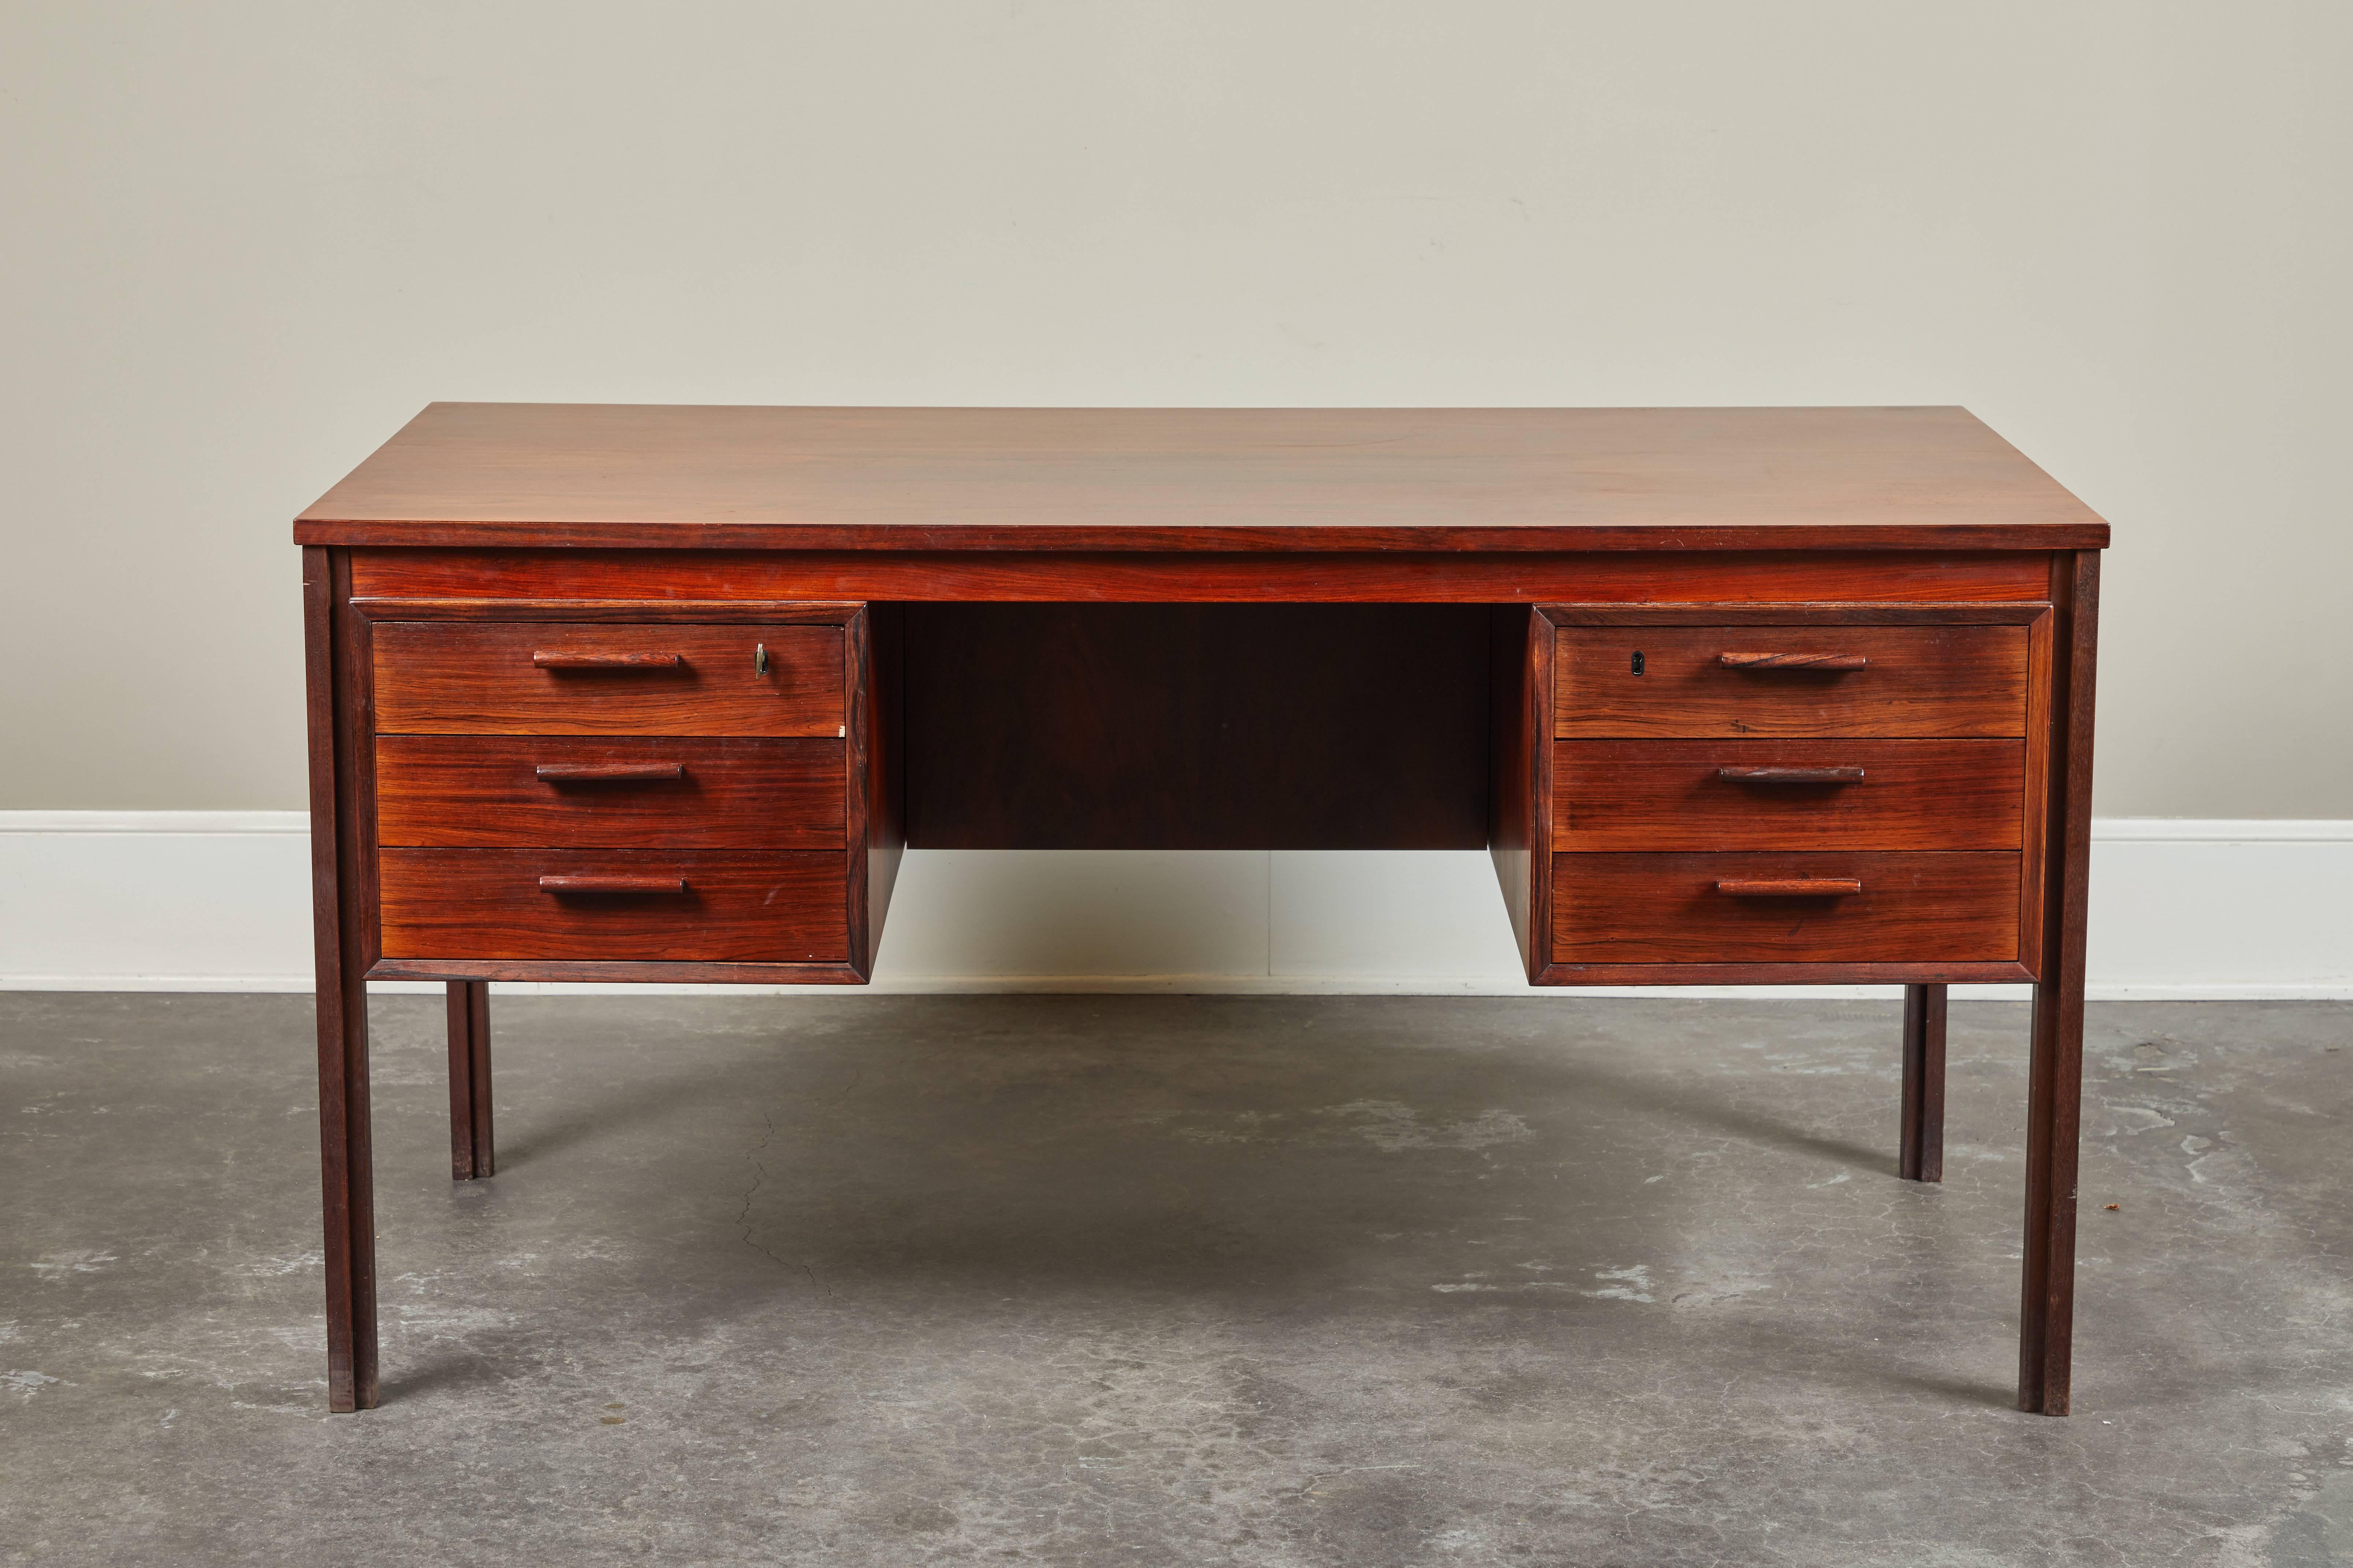 1960s Danish desk by Kai Kristiansen. Features three drawers on either side of desk, as well as open storage on backside.